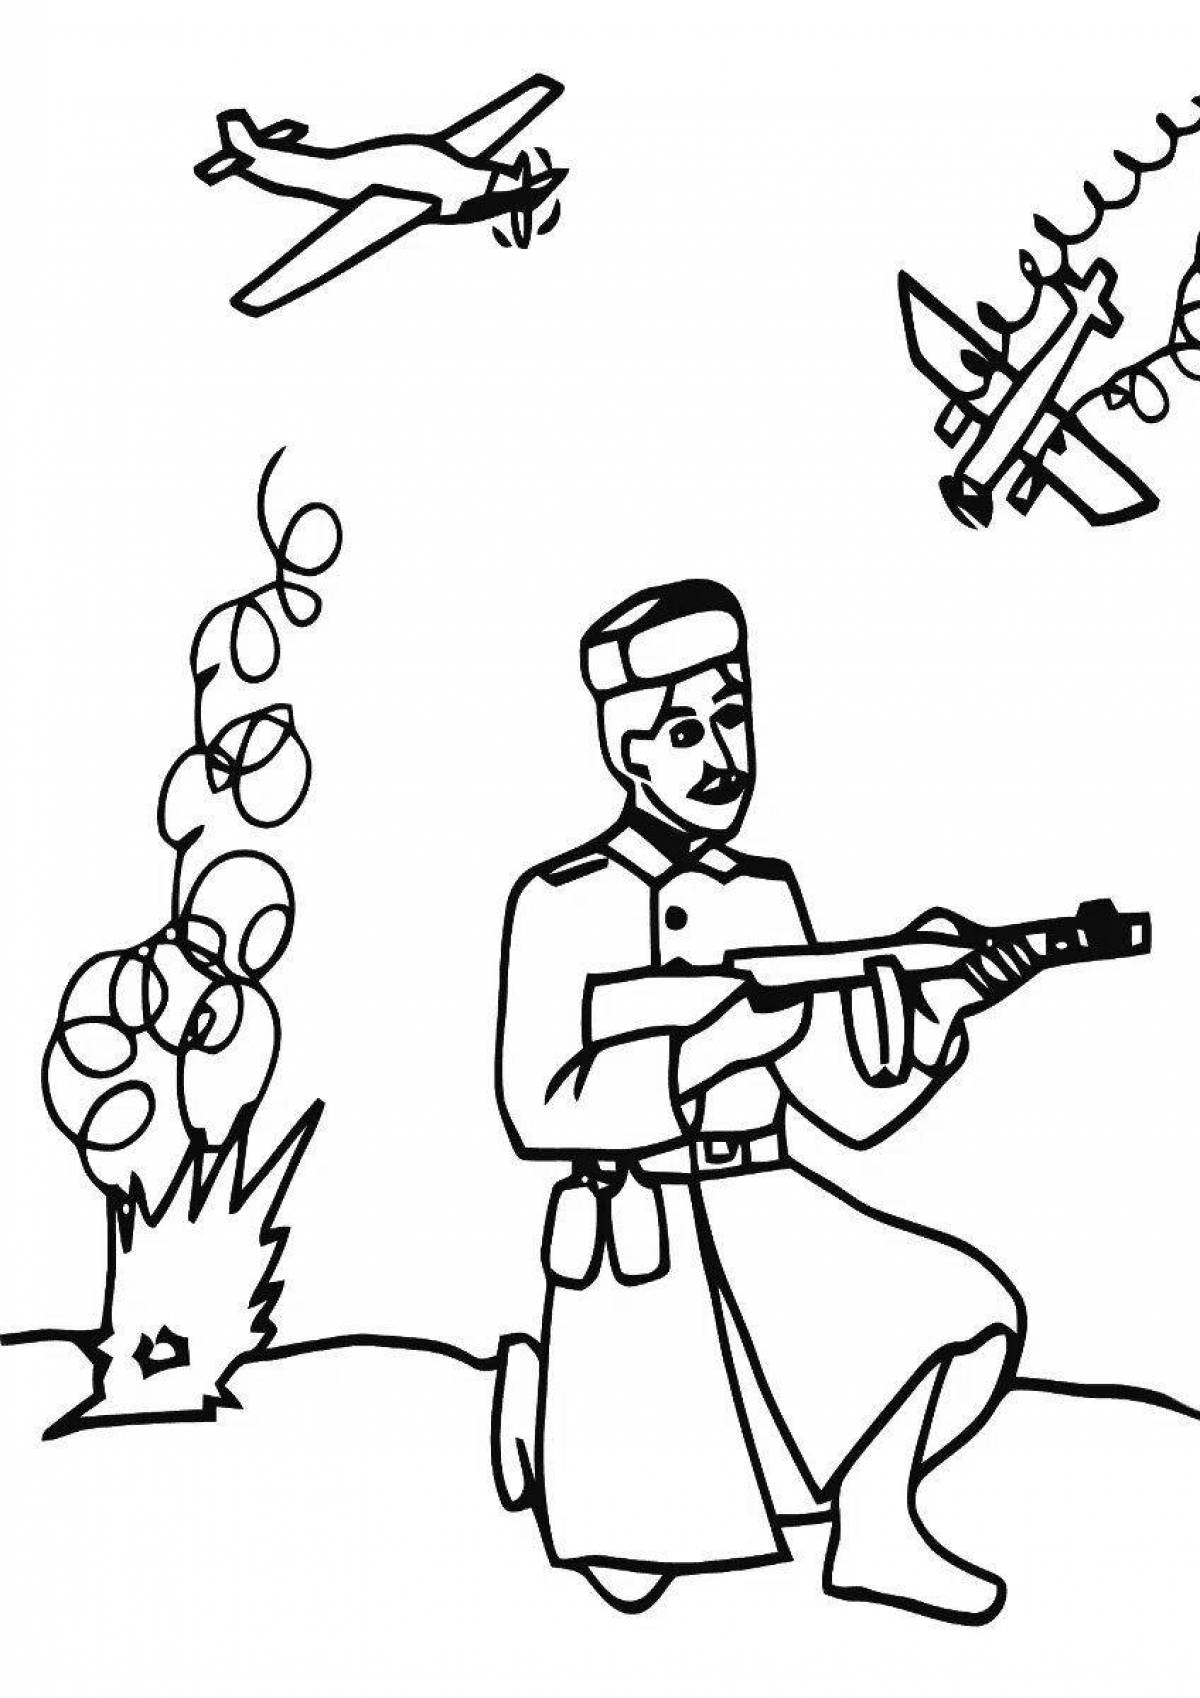 Colorfully decorated coloring book dedicated to the day of the Battle of Stalingrad